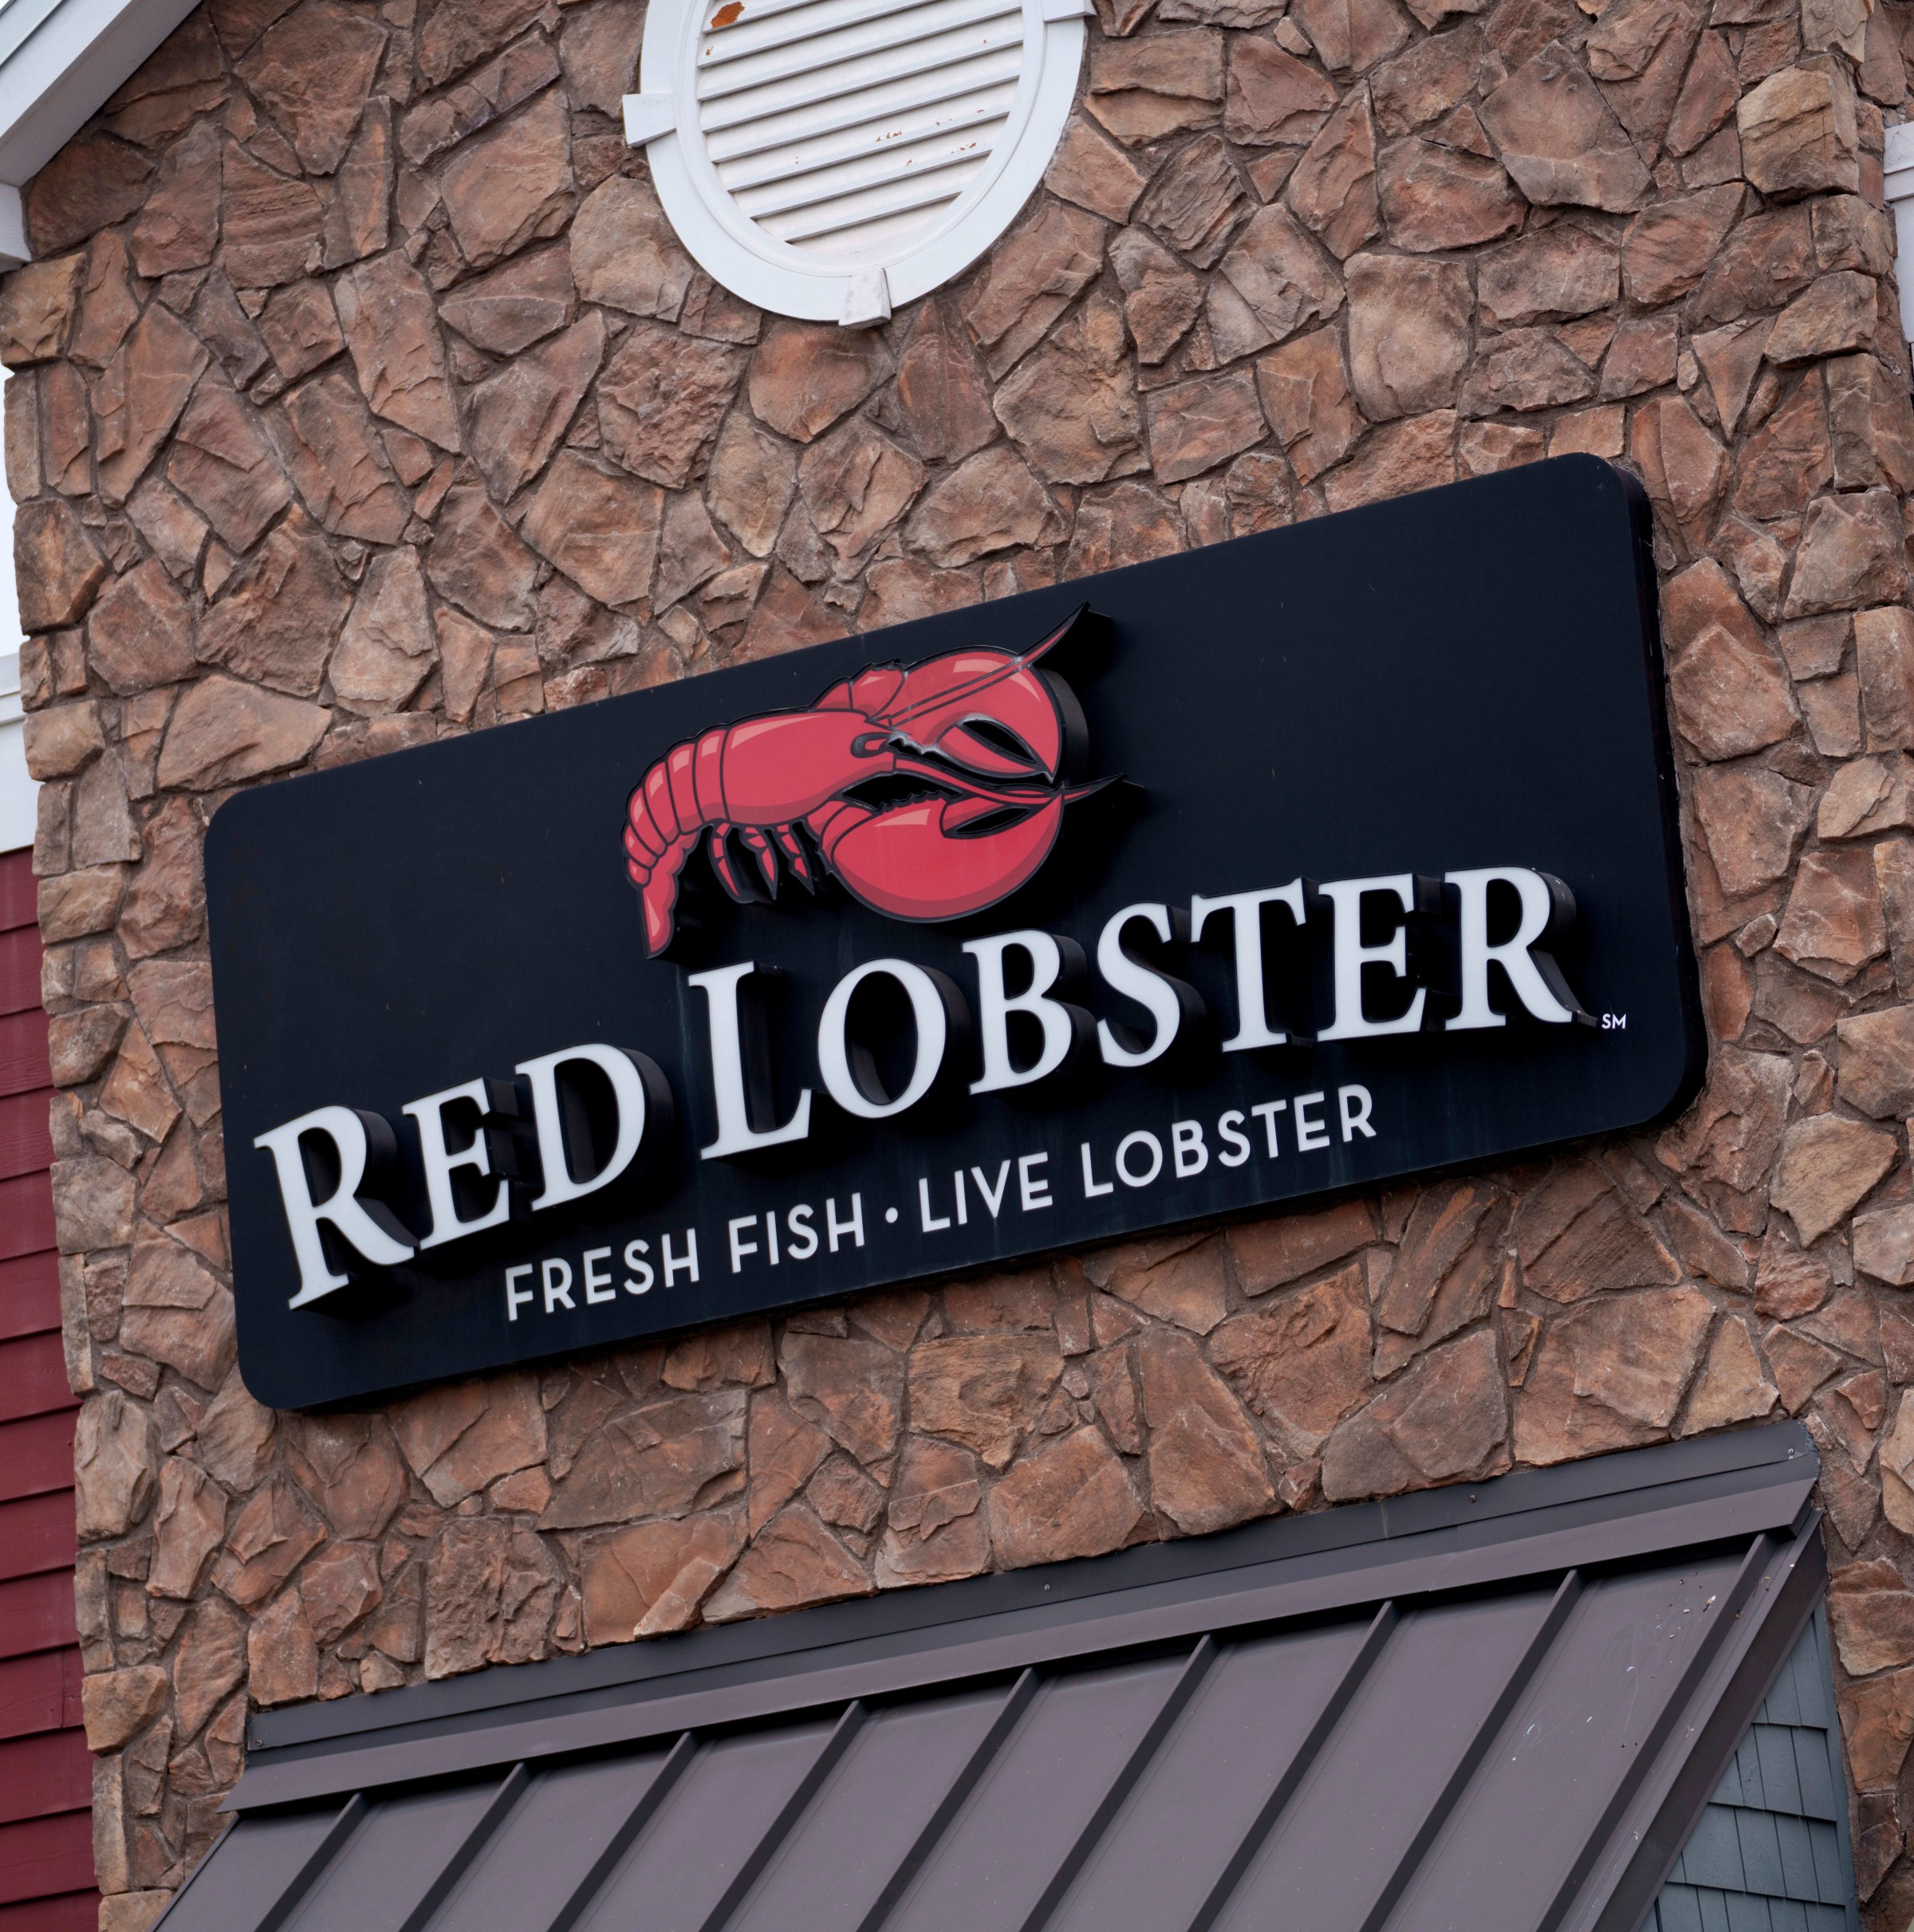 Red Lobster’s mistakes go beyond endless shrimp